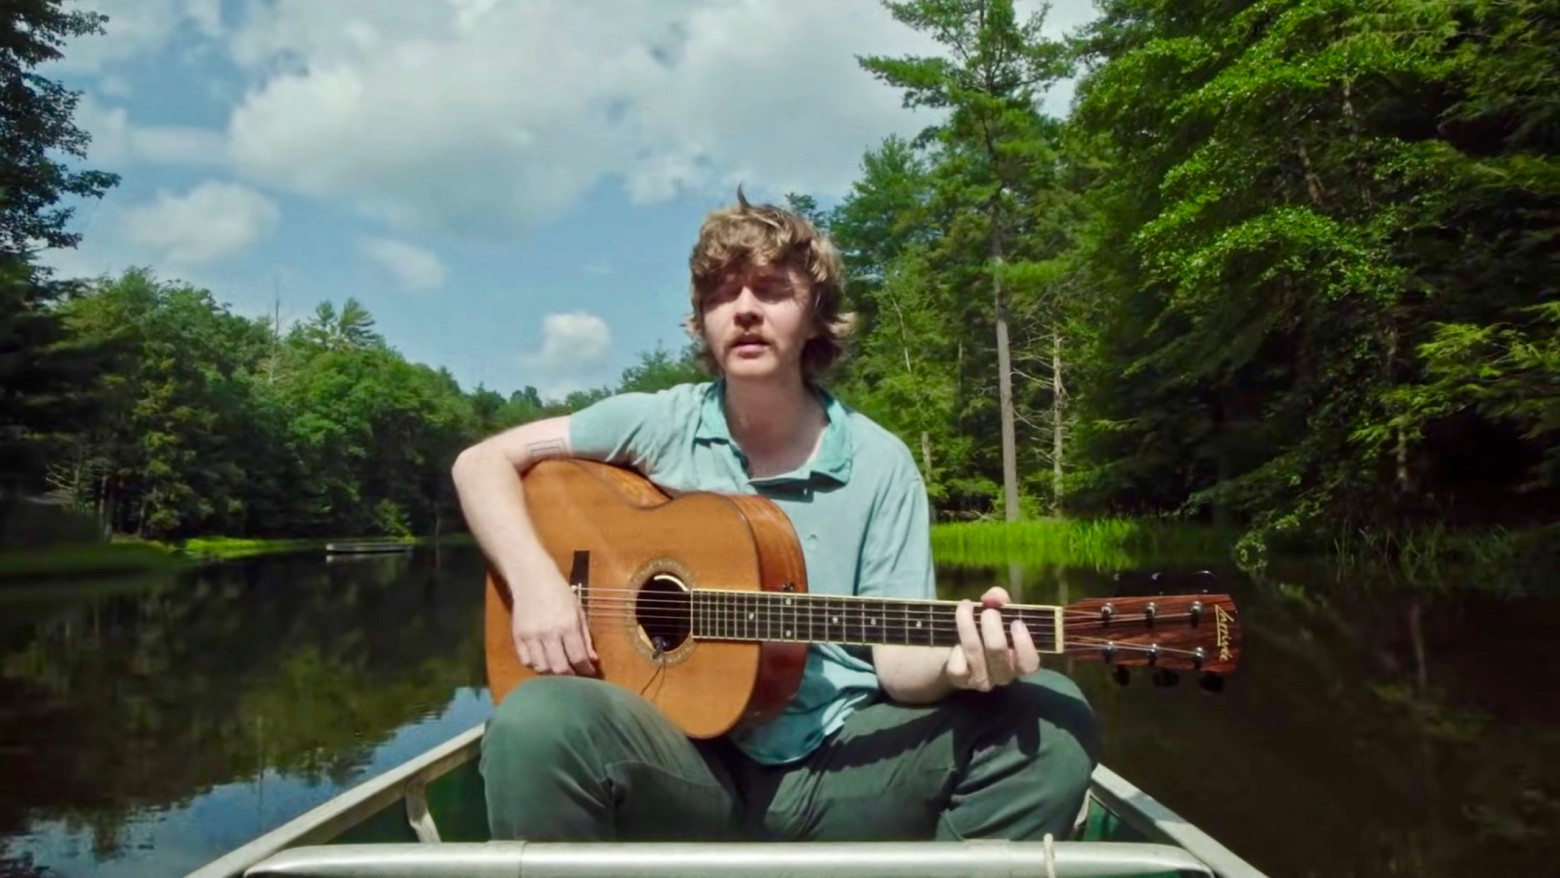 A man with dark blonde hair in a pale green polo and green pants plays guitar while in a canoe in a narrow body of water surrounded by lush green trees and a cloudy blue sky.